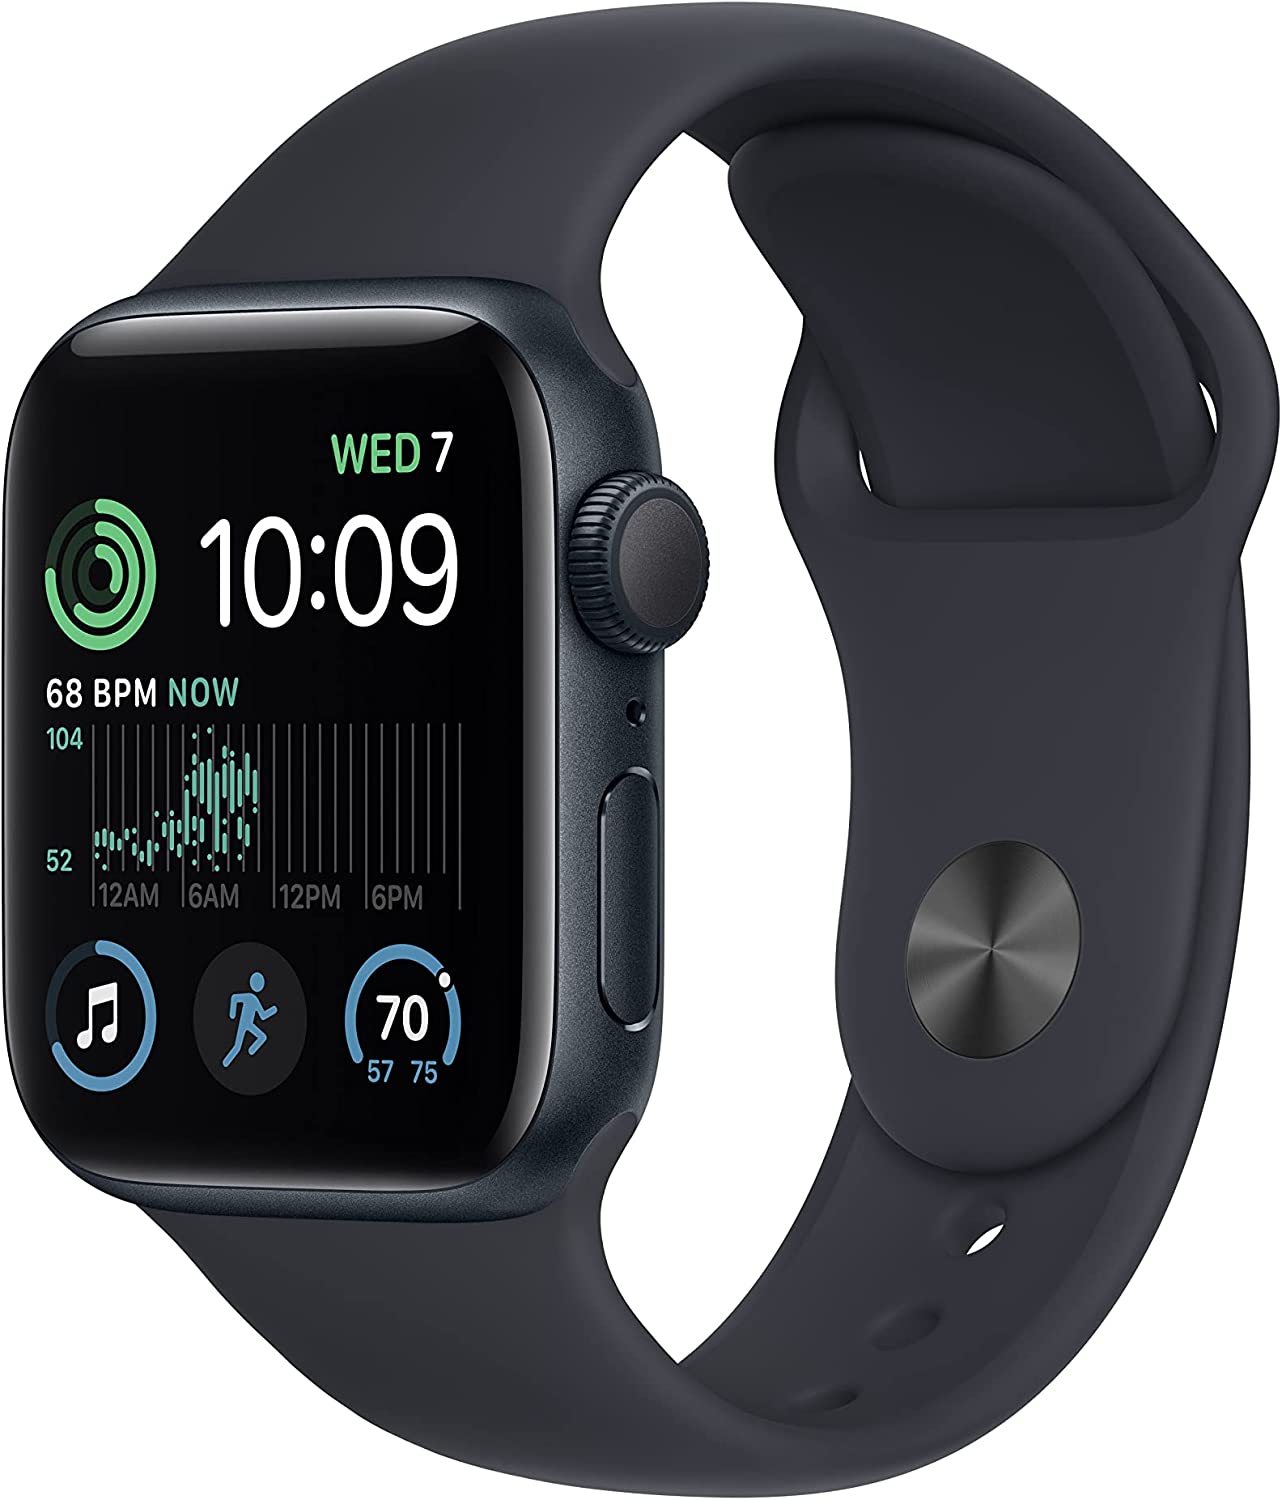 Apple Watch SE Price Drops on Amazon and Best Buy to Just $219: Not an April Fool's Day Deal